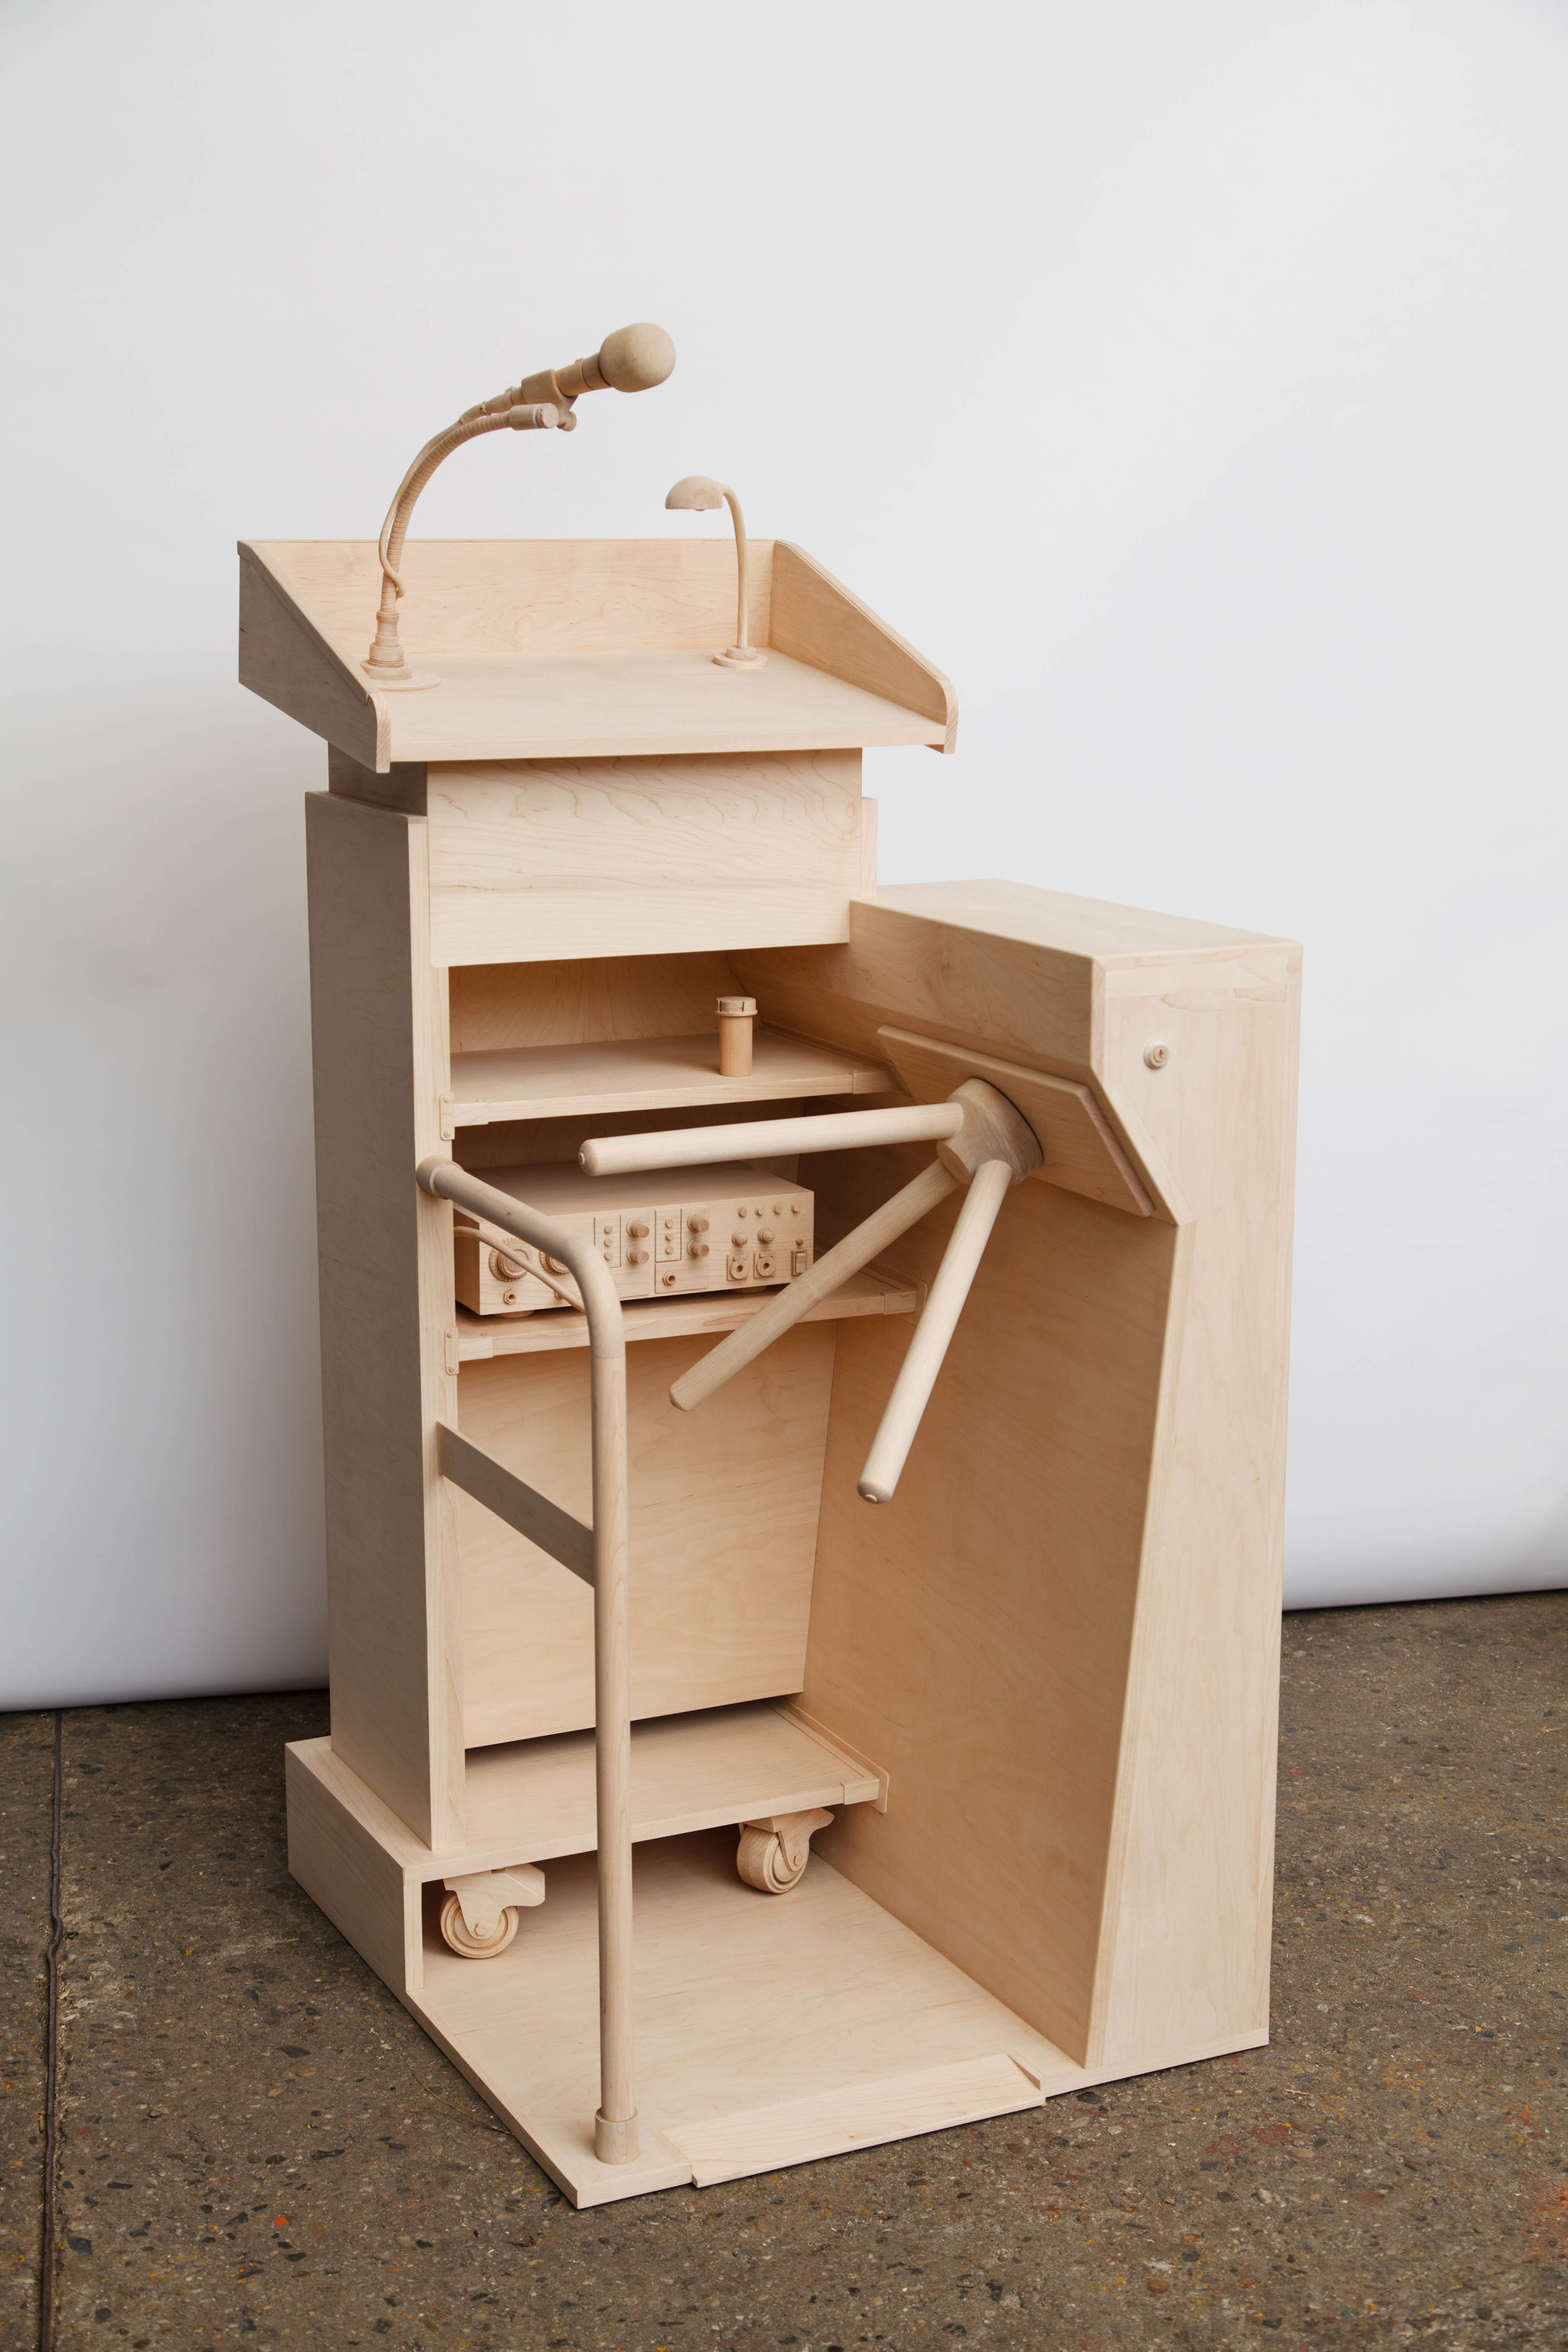  revolution, 2014, Maple wood, 63 x 32 x 27 inches 